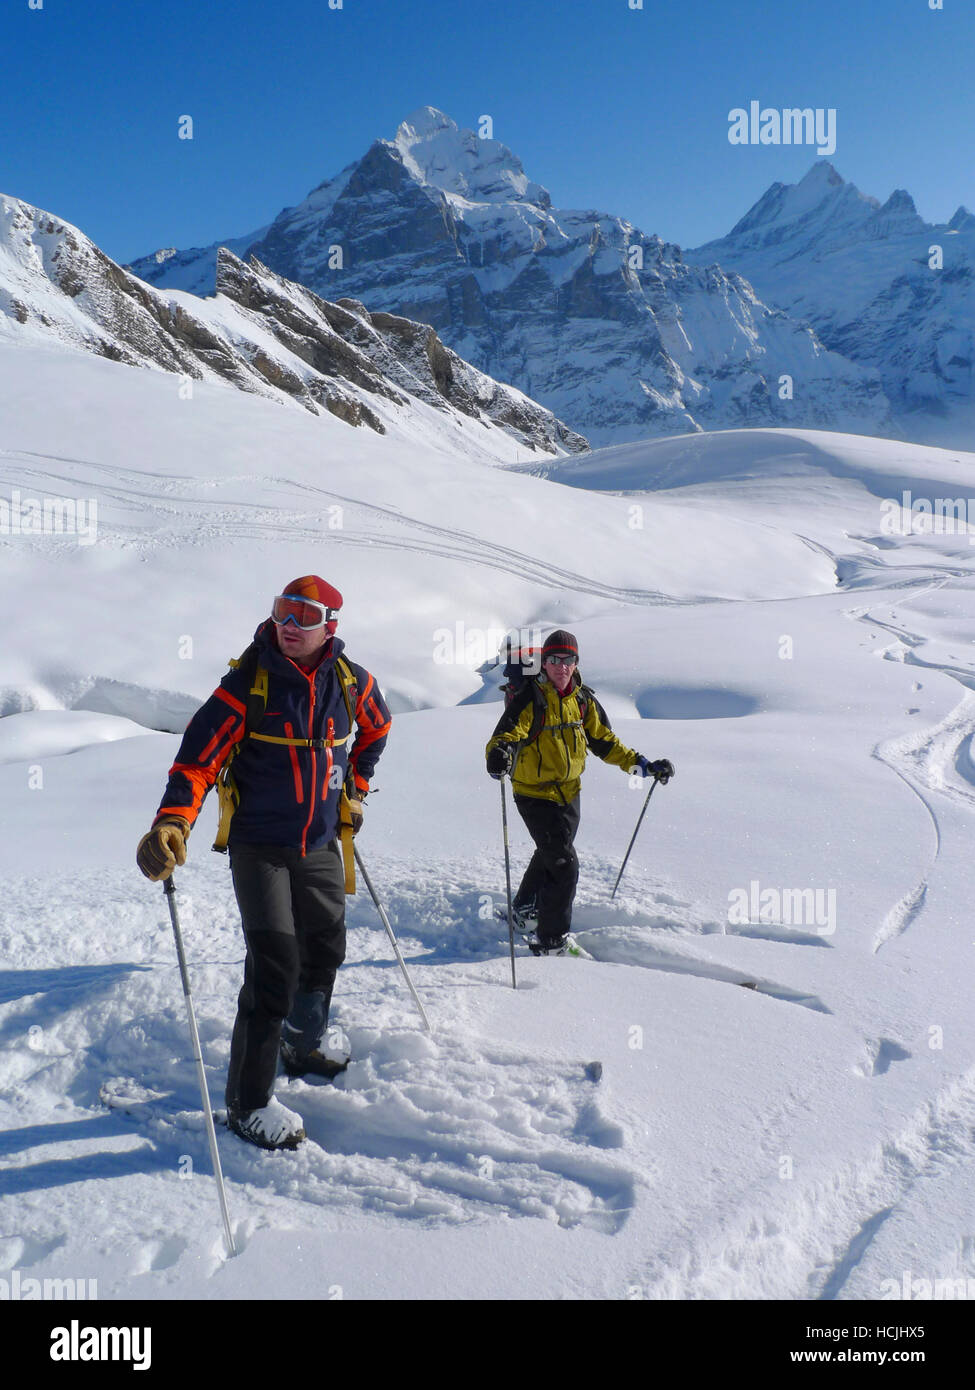 Skiers Thomas Greenall and Peer Bueller are waiting for their friends to ski down a steep slope in powder snow. In the background the mountains of the Swiss Bernese Oberland Stock Photo